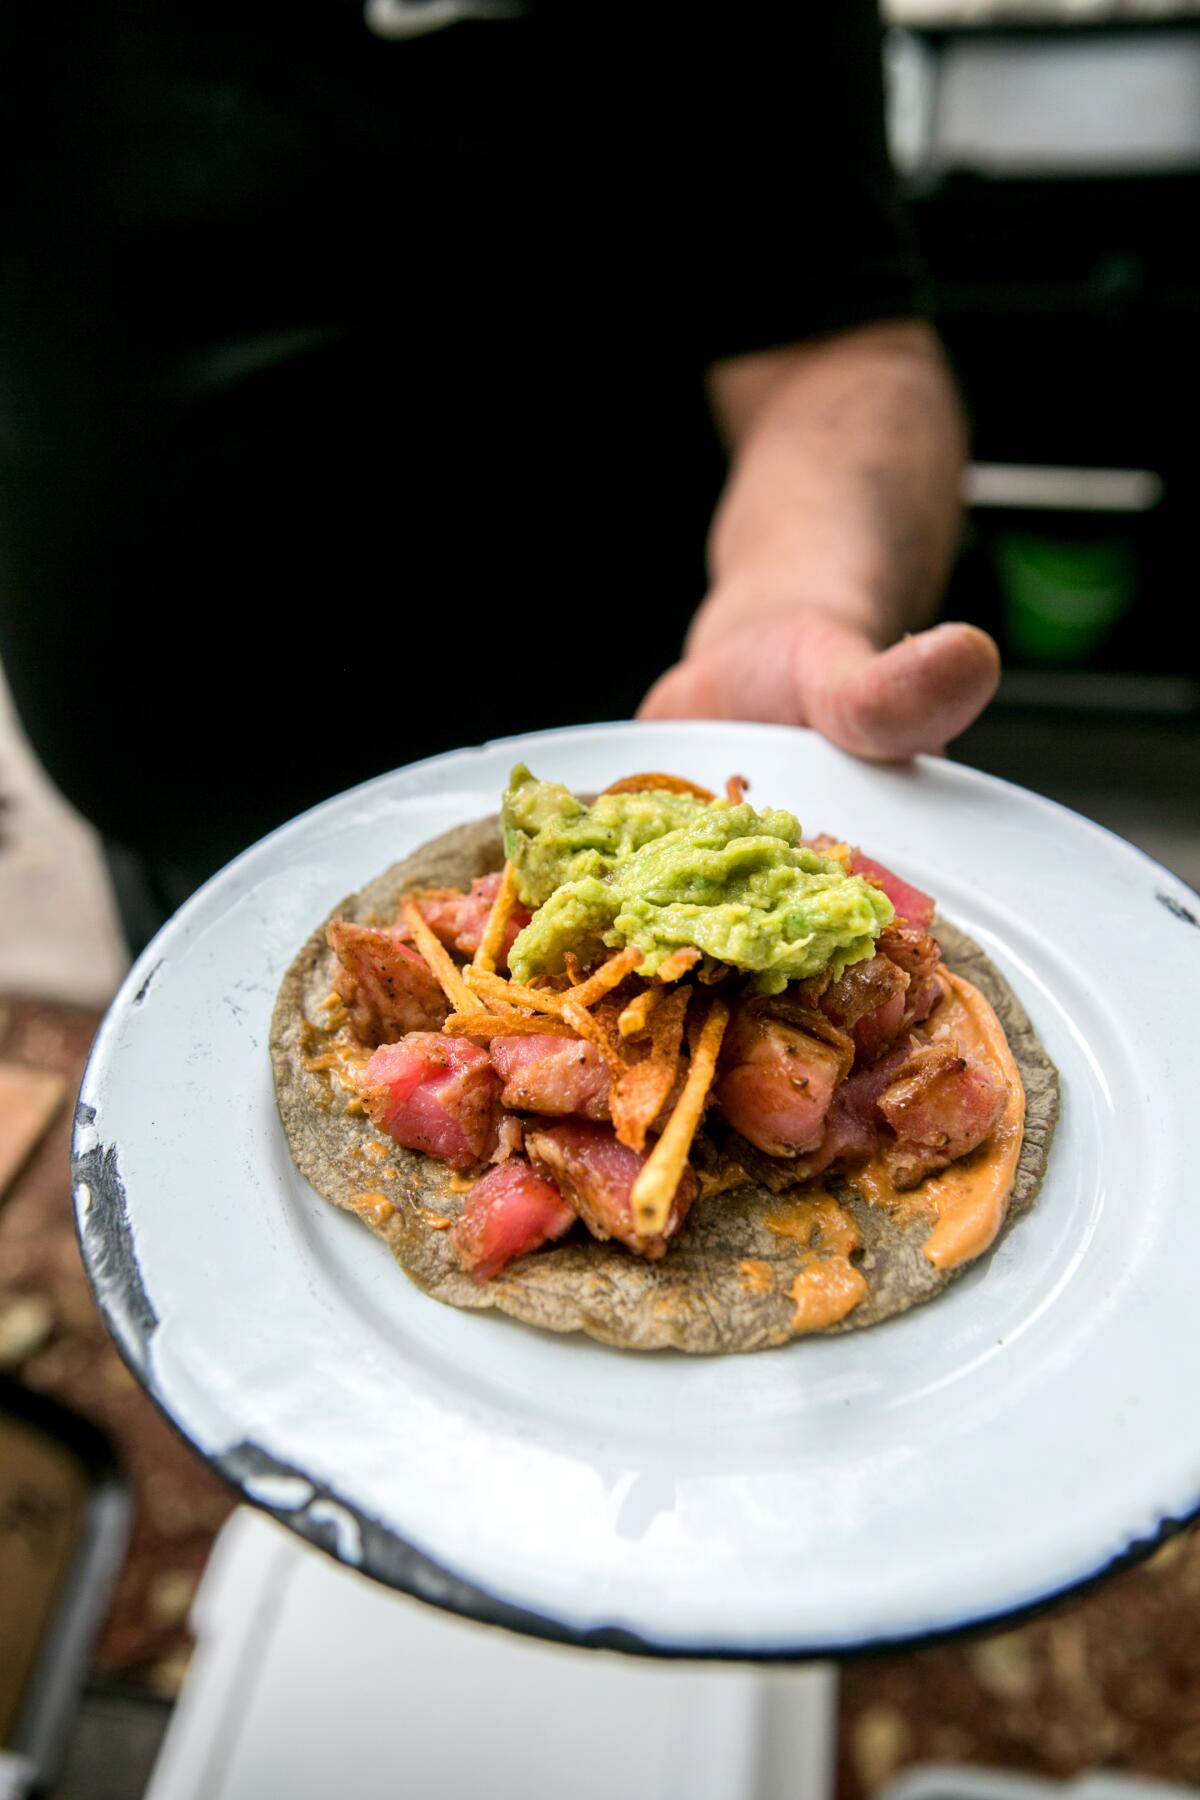 A tuna taco, made and served outdoors on the sidewalk in front of Mexico City restaurant Paramo.